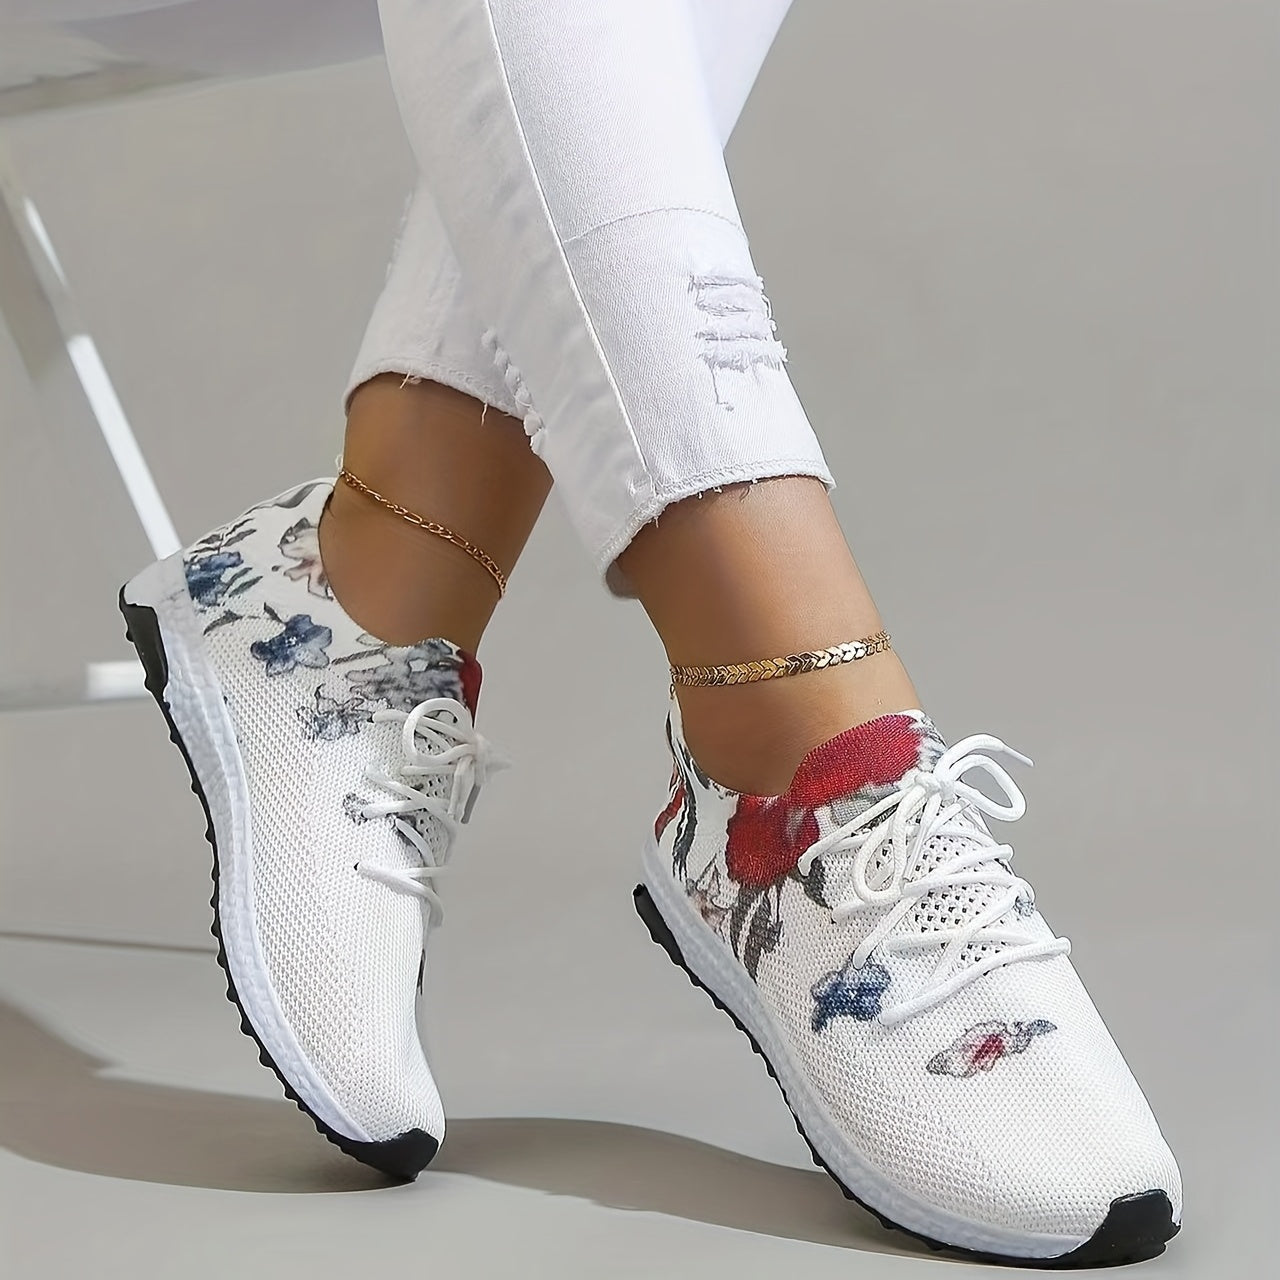 「lovevop」Women's Floral Print Sneakers, Lightweight Low Top Lace Up Shoes, Women's Breathable Knit Shoes